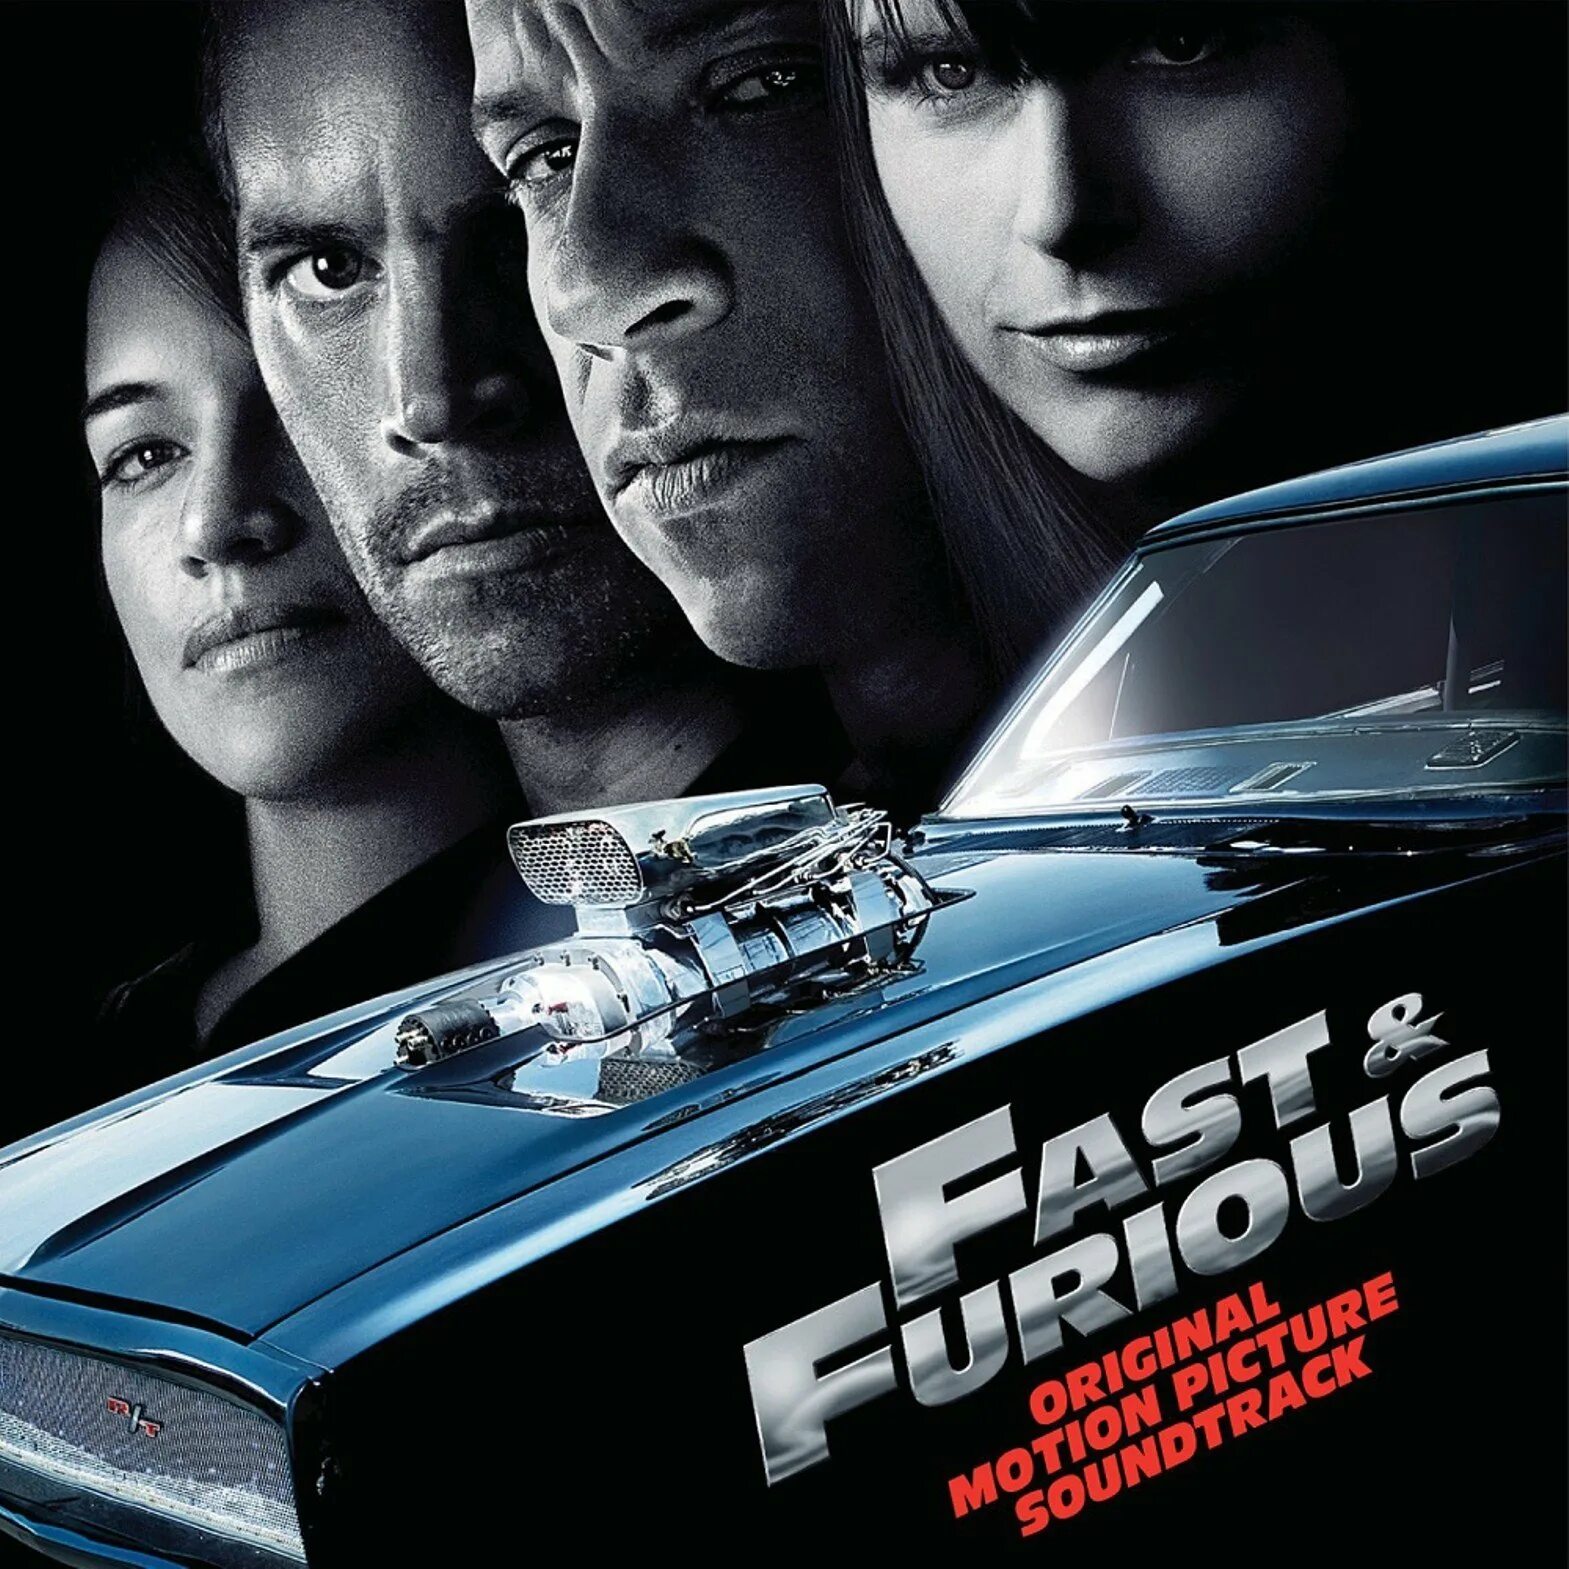 Soundtrack fast. Fast and Furious обложка. Форсаж 4 (fast & Furious), 2009 Постер. Fast and Furious 4 OST.